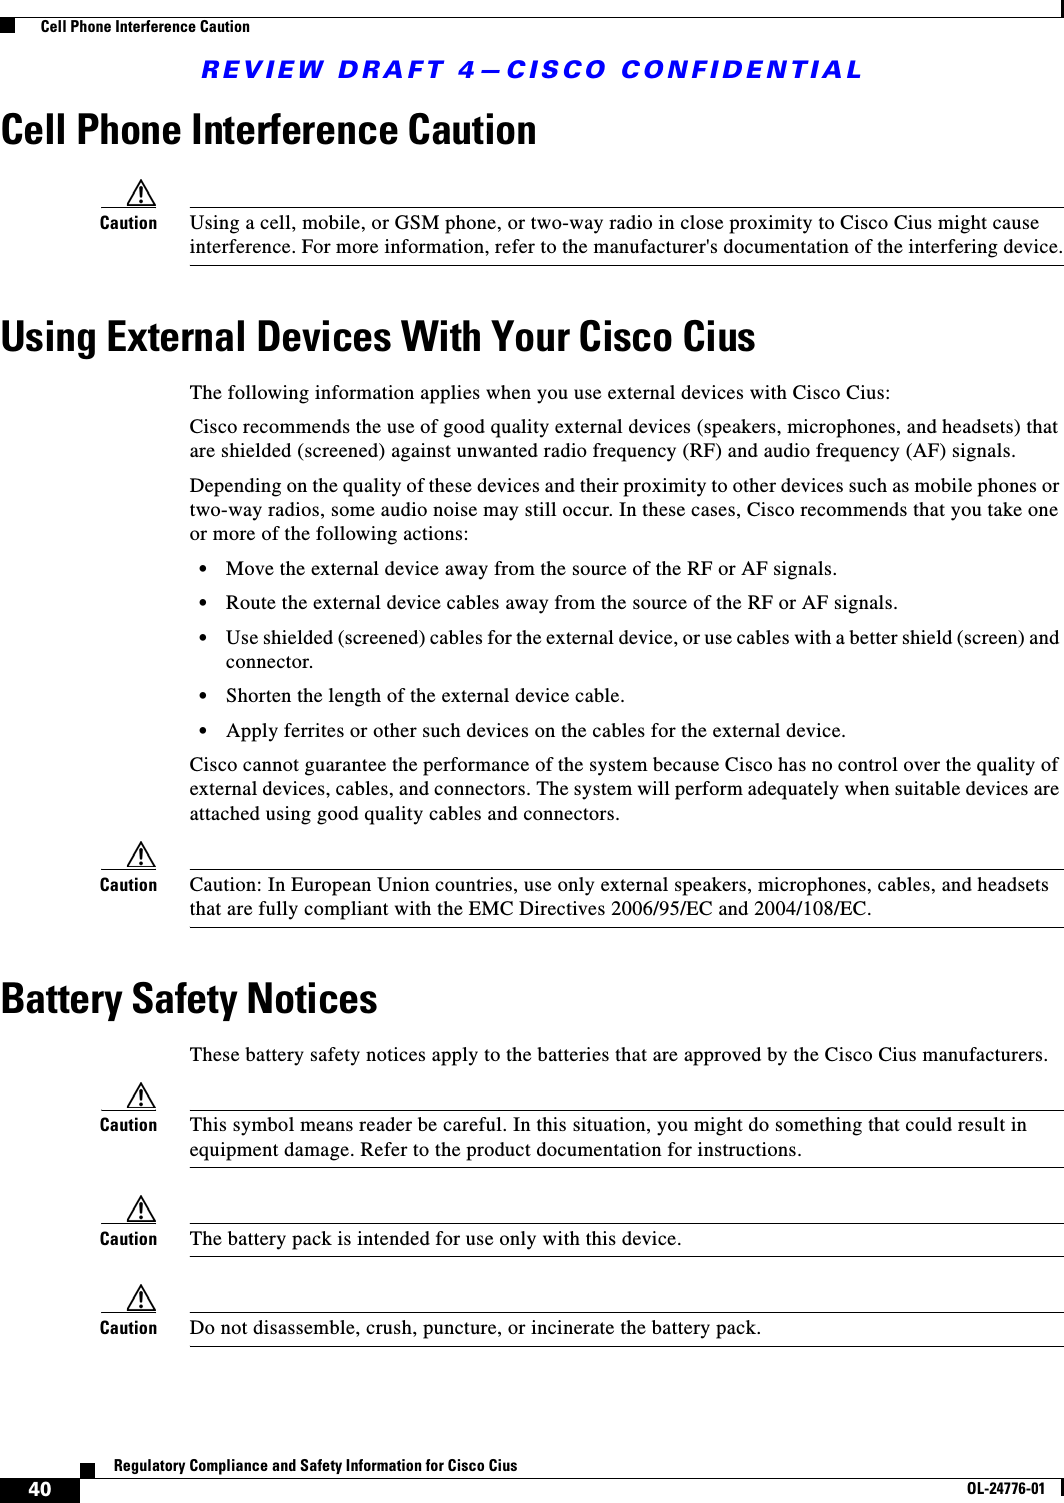 REVIEW DRAFT 4—CISCO CONFIDENTIAL40Regulatory Compliance and Safety Information for Cisco CiusOL-24776-01  Cell Phone Interference CautionCell Phone Interference CautionCaution Using a cell, mobile, or GSM phone, or two-way radio in close proximity to Cisco Cius might cause interference. For more information, refer to the manufacturer&apos;s documentation of the interfering device.Using External Devices With Your Cisco CiusThe following information applies when you use external devices with Cisco Cius:Cisco recommends the use of good quality external devices (speakers, microphones, and headsets) that are shielded (screened) against unwanted radio frequency (RF) and audio frequency (AF) signals. Depending on the quality of these devices and their proximity to other devices such as mobile phones or two-way radios, some audio noise may still occur. In these cases, Cisco recommends that you take one or more of the following actions:  • Move the external device away from the source of the RF or AF signals.  • Route the external device cables away from the source of the RF or AF signals.  • Use shielded (screened) cables for the external device, or use cables with a better shield (screen) and connector. • Shorten the length of the external device cable. • Apply ferrites or other such devices on the cables for the external device. Cisco cannot guarantee the performance of the system because Cisco has no control over the quality of external devices, cables, and connectors. The system will perform adequately when suitable devices are attached using good quality cables and connectors. Caution Caution: In European Union countries, use only external speakers, microphones, cables, and headsets that are fully compliant with the EMC Directives 2006/95/EC and 2004/108/EC.Battery Safety NoticesThese battery safety notices apply to the batteries that are approved by the Cisco Cius manufacturers.Caution This symbol means reader be careful. In this situation, you might do something that could result in equipment damage. Refer to the product documentation for instructions.Caution The battery pack is intended for use only with this device.Caution Do not disassemble, crush, puncture, or incinerate the battery pack.